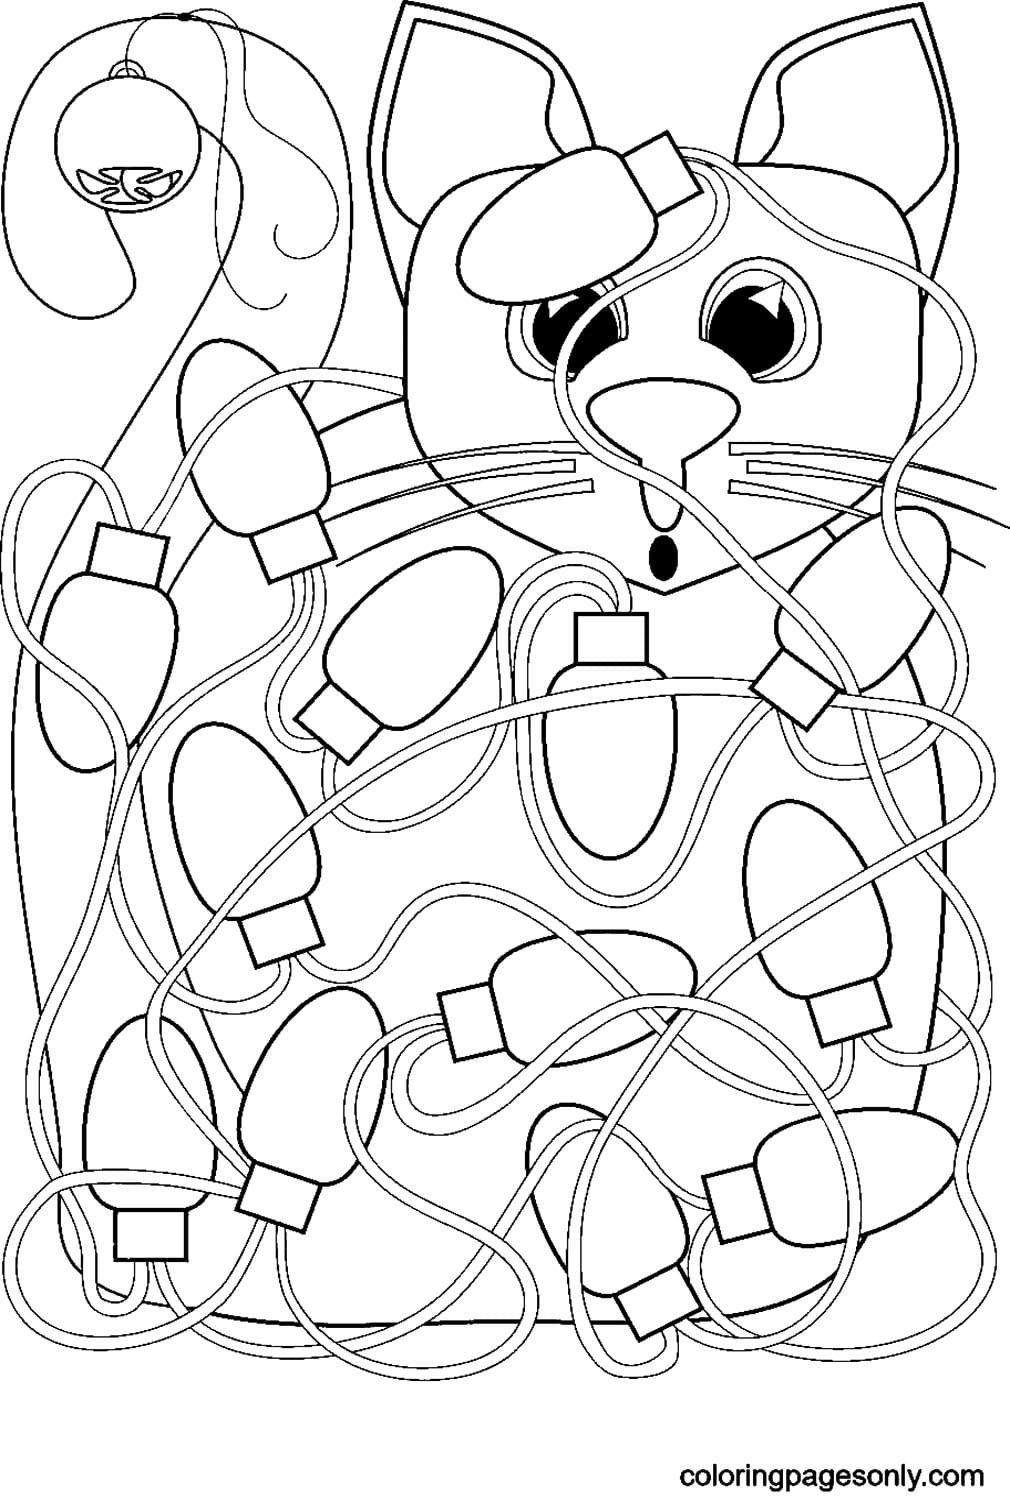 Cat Tangled In Christmas Lights Coloring Pages